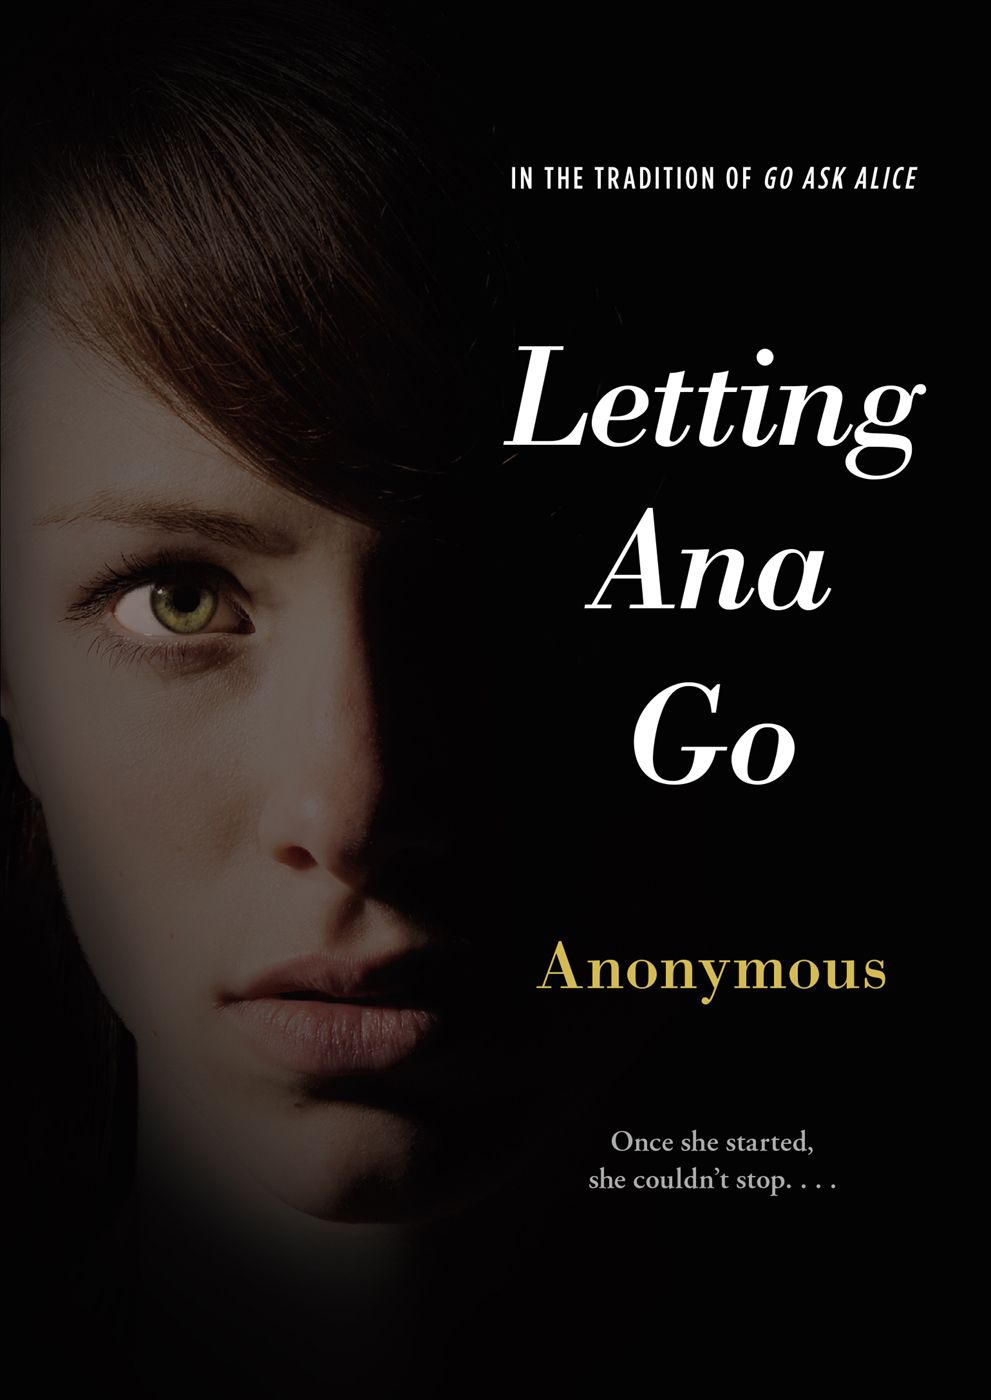 Letting Ana Go by Anonymous